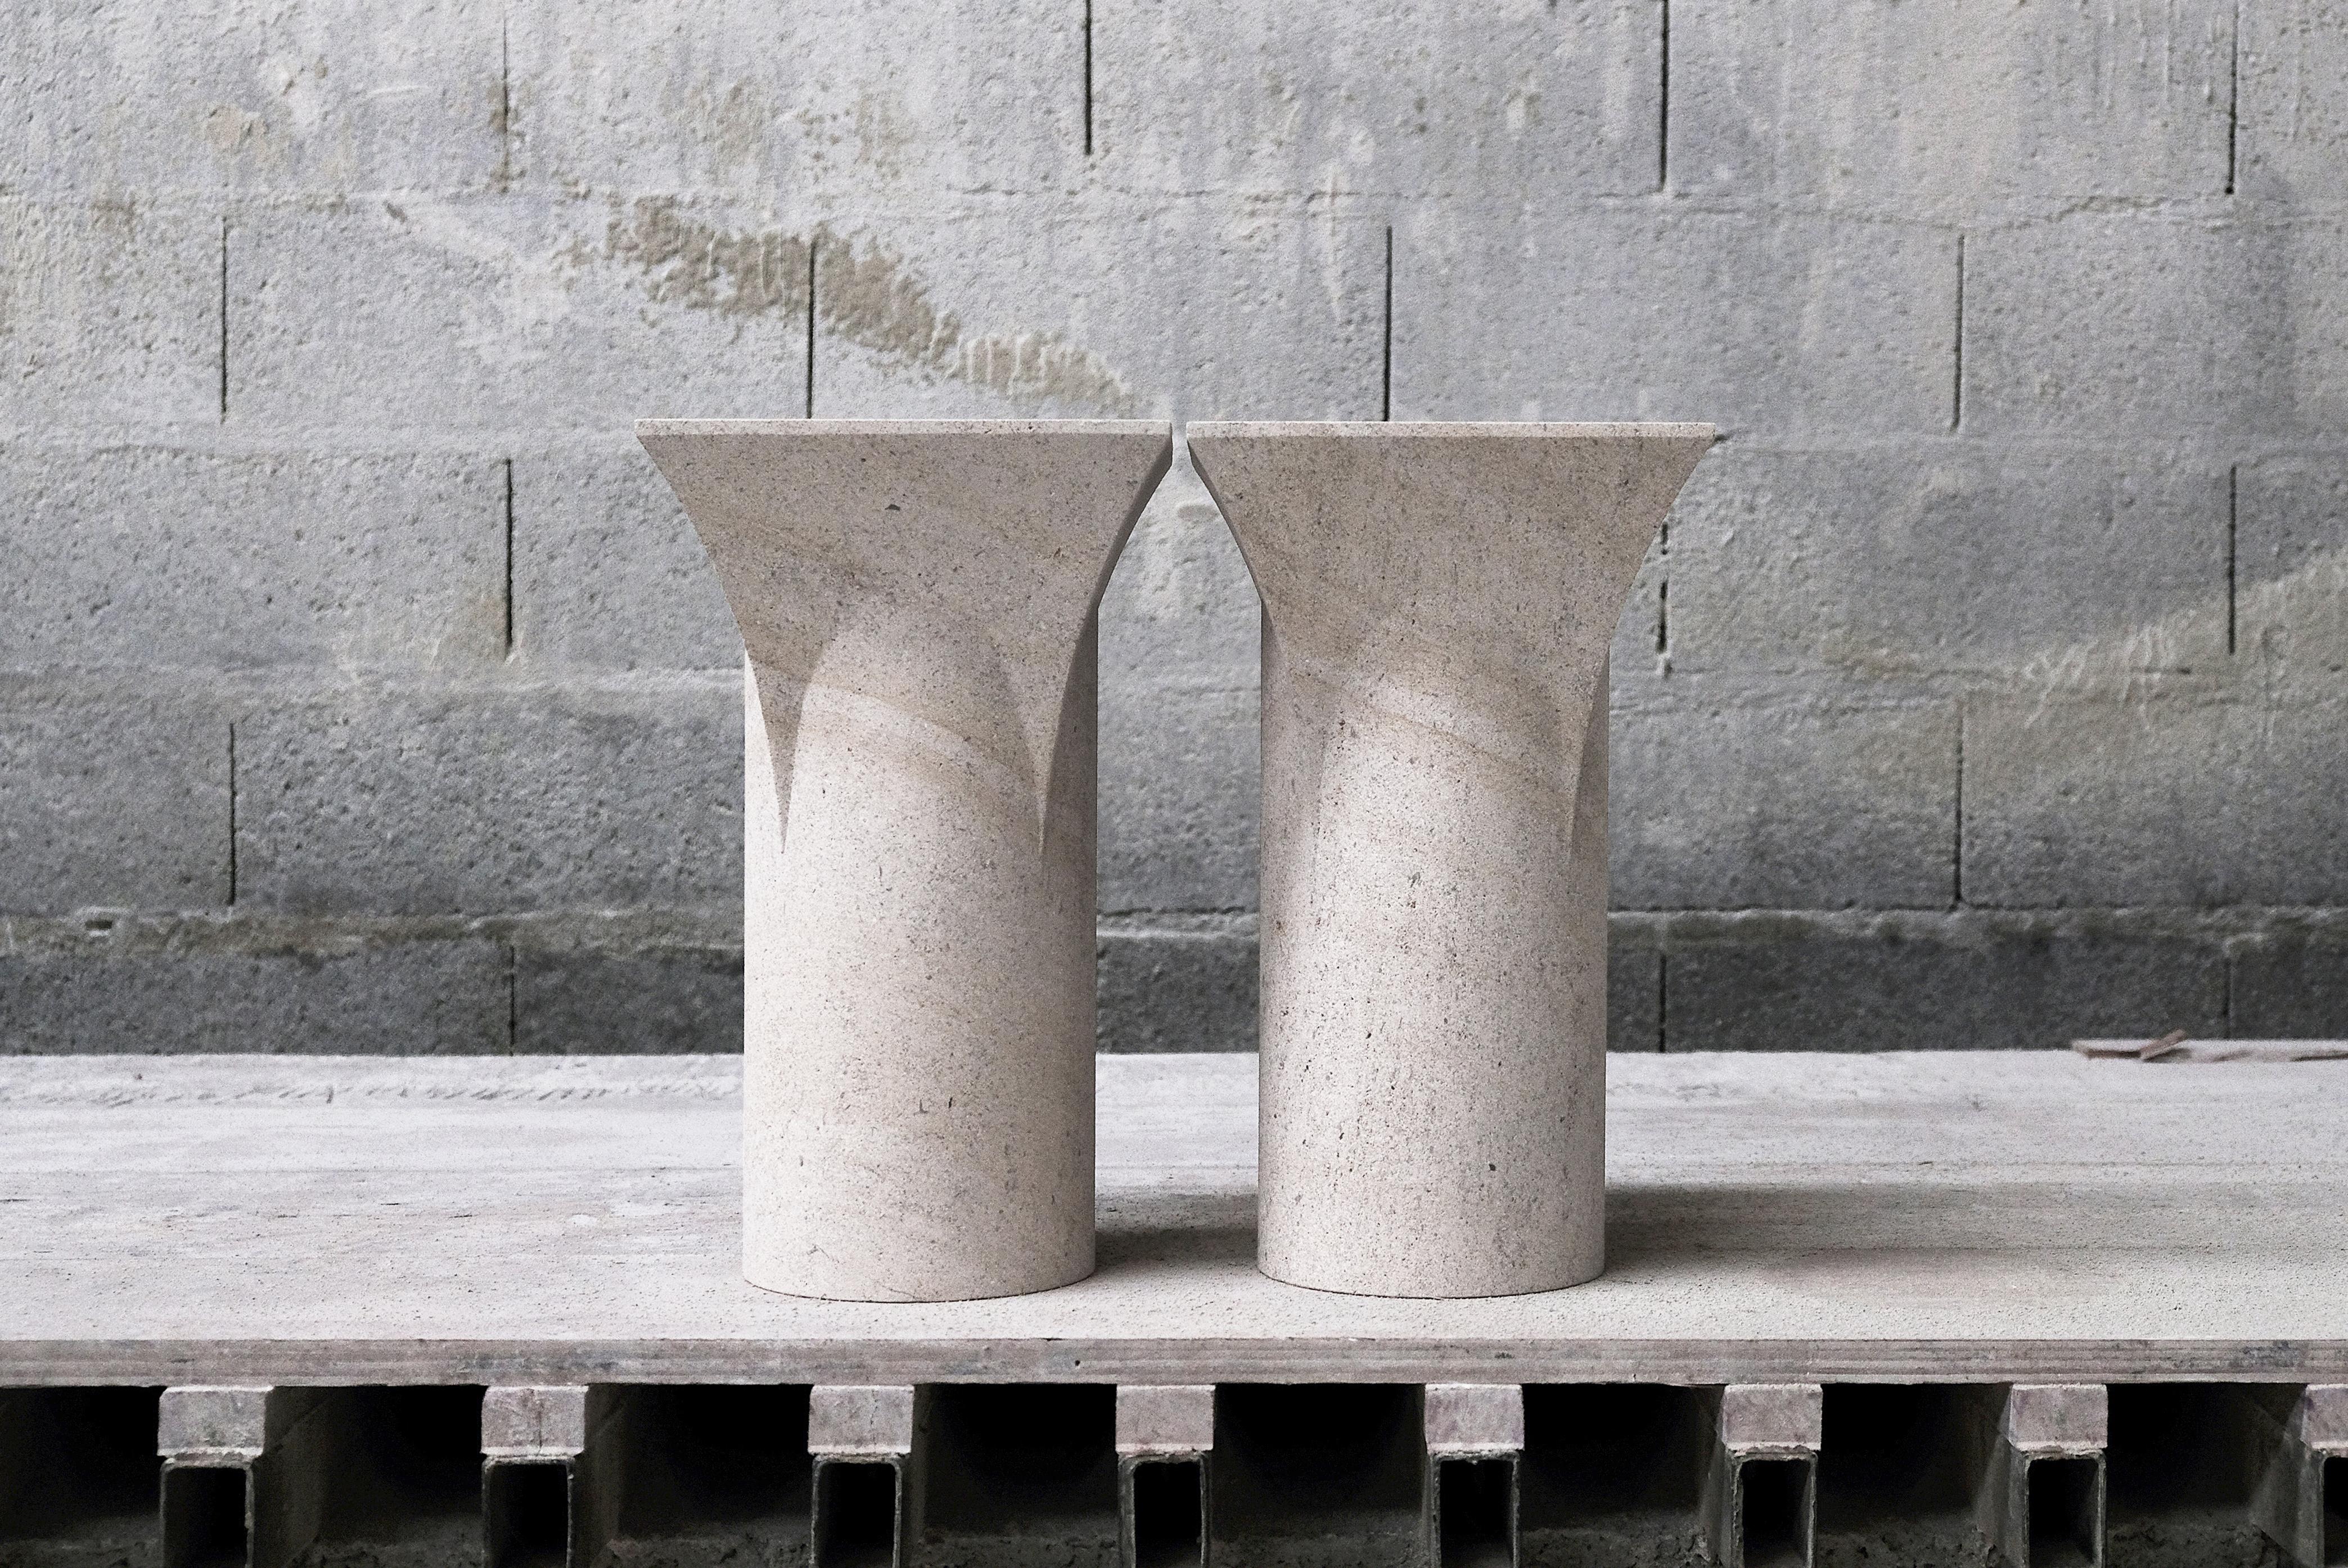 Pair of Courtois stone side tables - Frederic Saulou
Ravissant pair of side tables. Can also be used as stools.
Designer: Frédéric Saulou.
Materials: Flamed stone.
Dimensions: 42 x 26 x 26 cm.
Signed.

